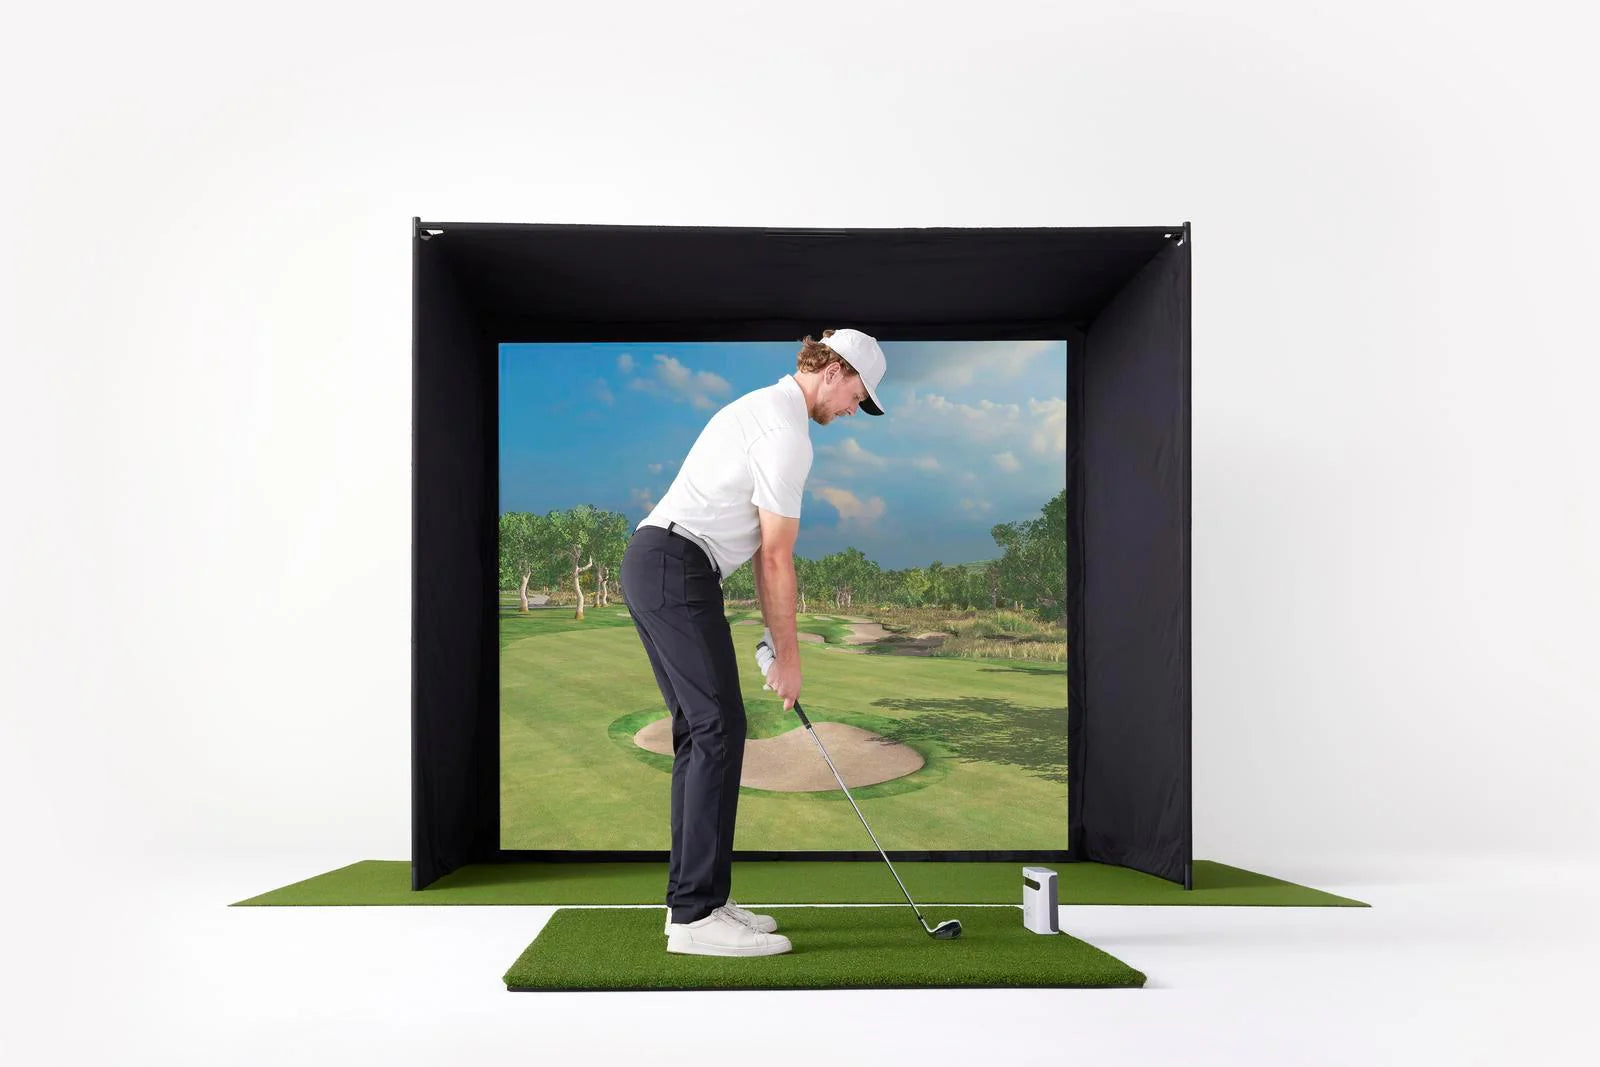 SkyTrak vs. Other Golf Simulators – Why It’s the Best Choice for Home Use